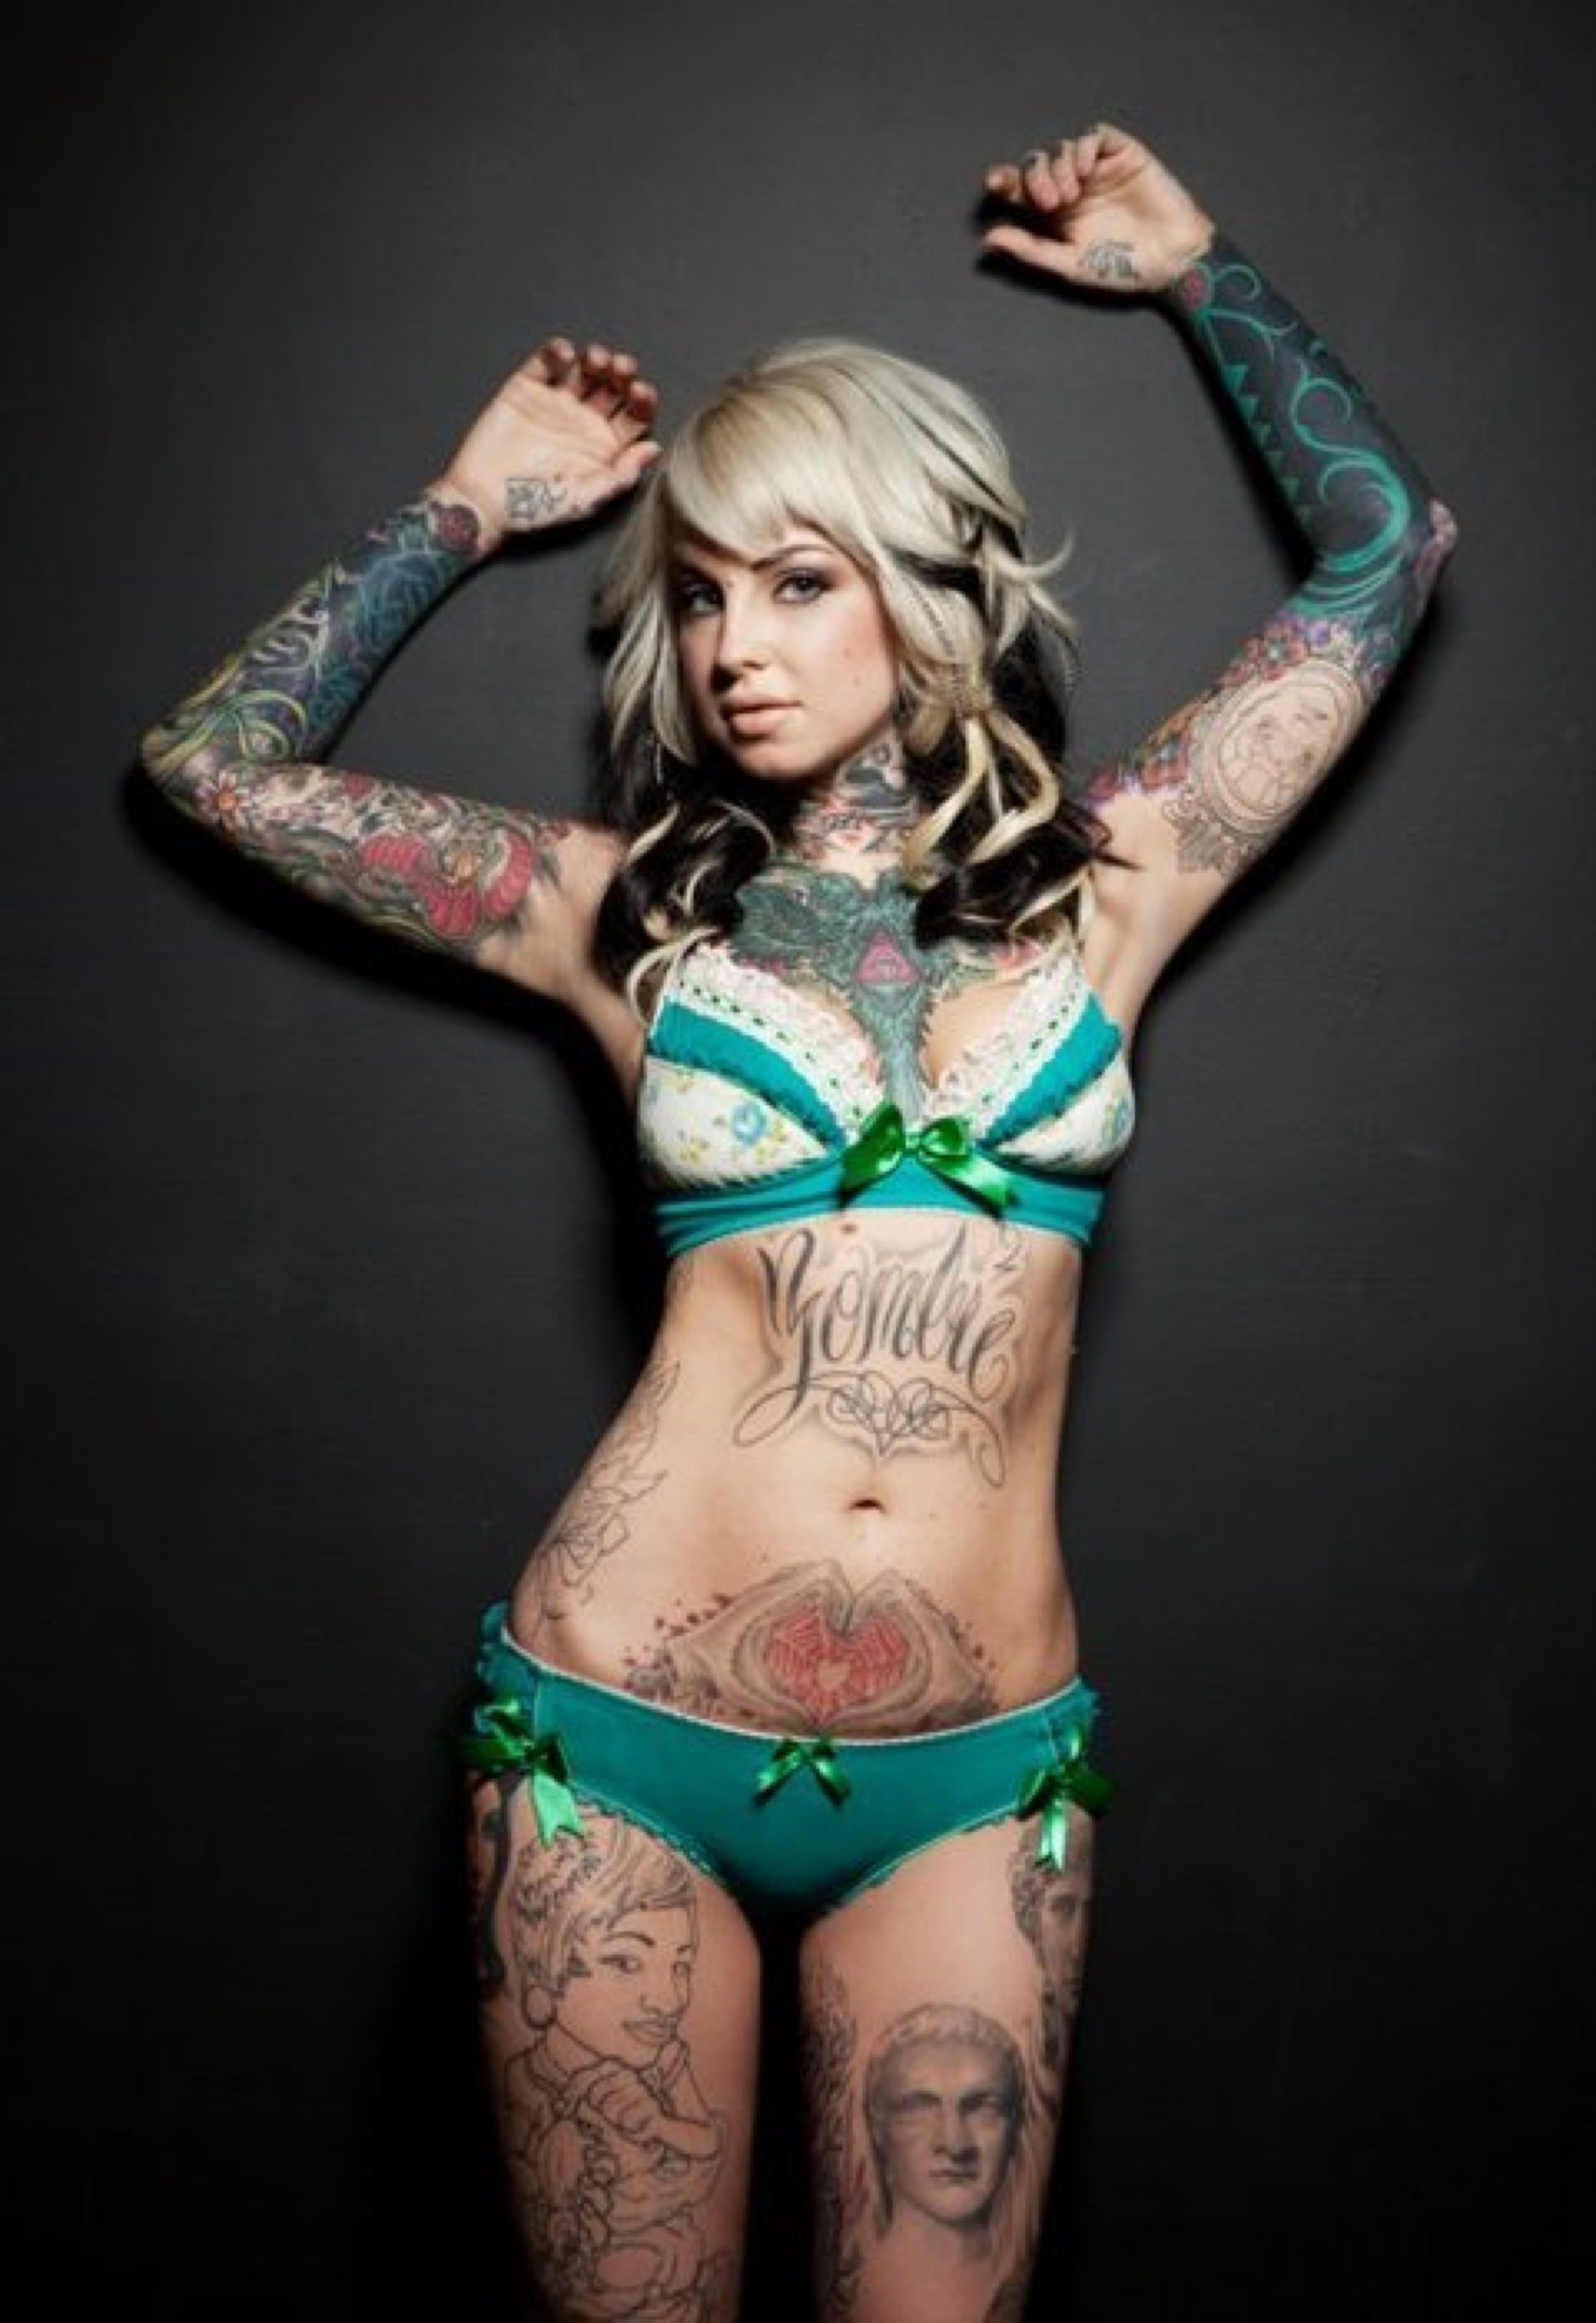 Naked Girls with Tattoos and a Bra (65 photos) - sex eporner pics